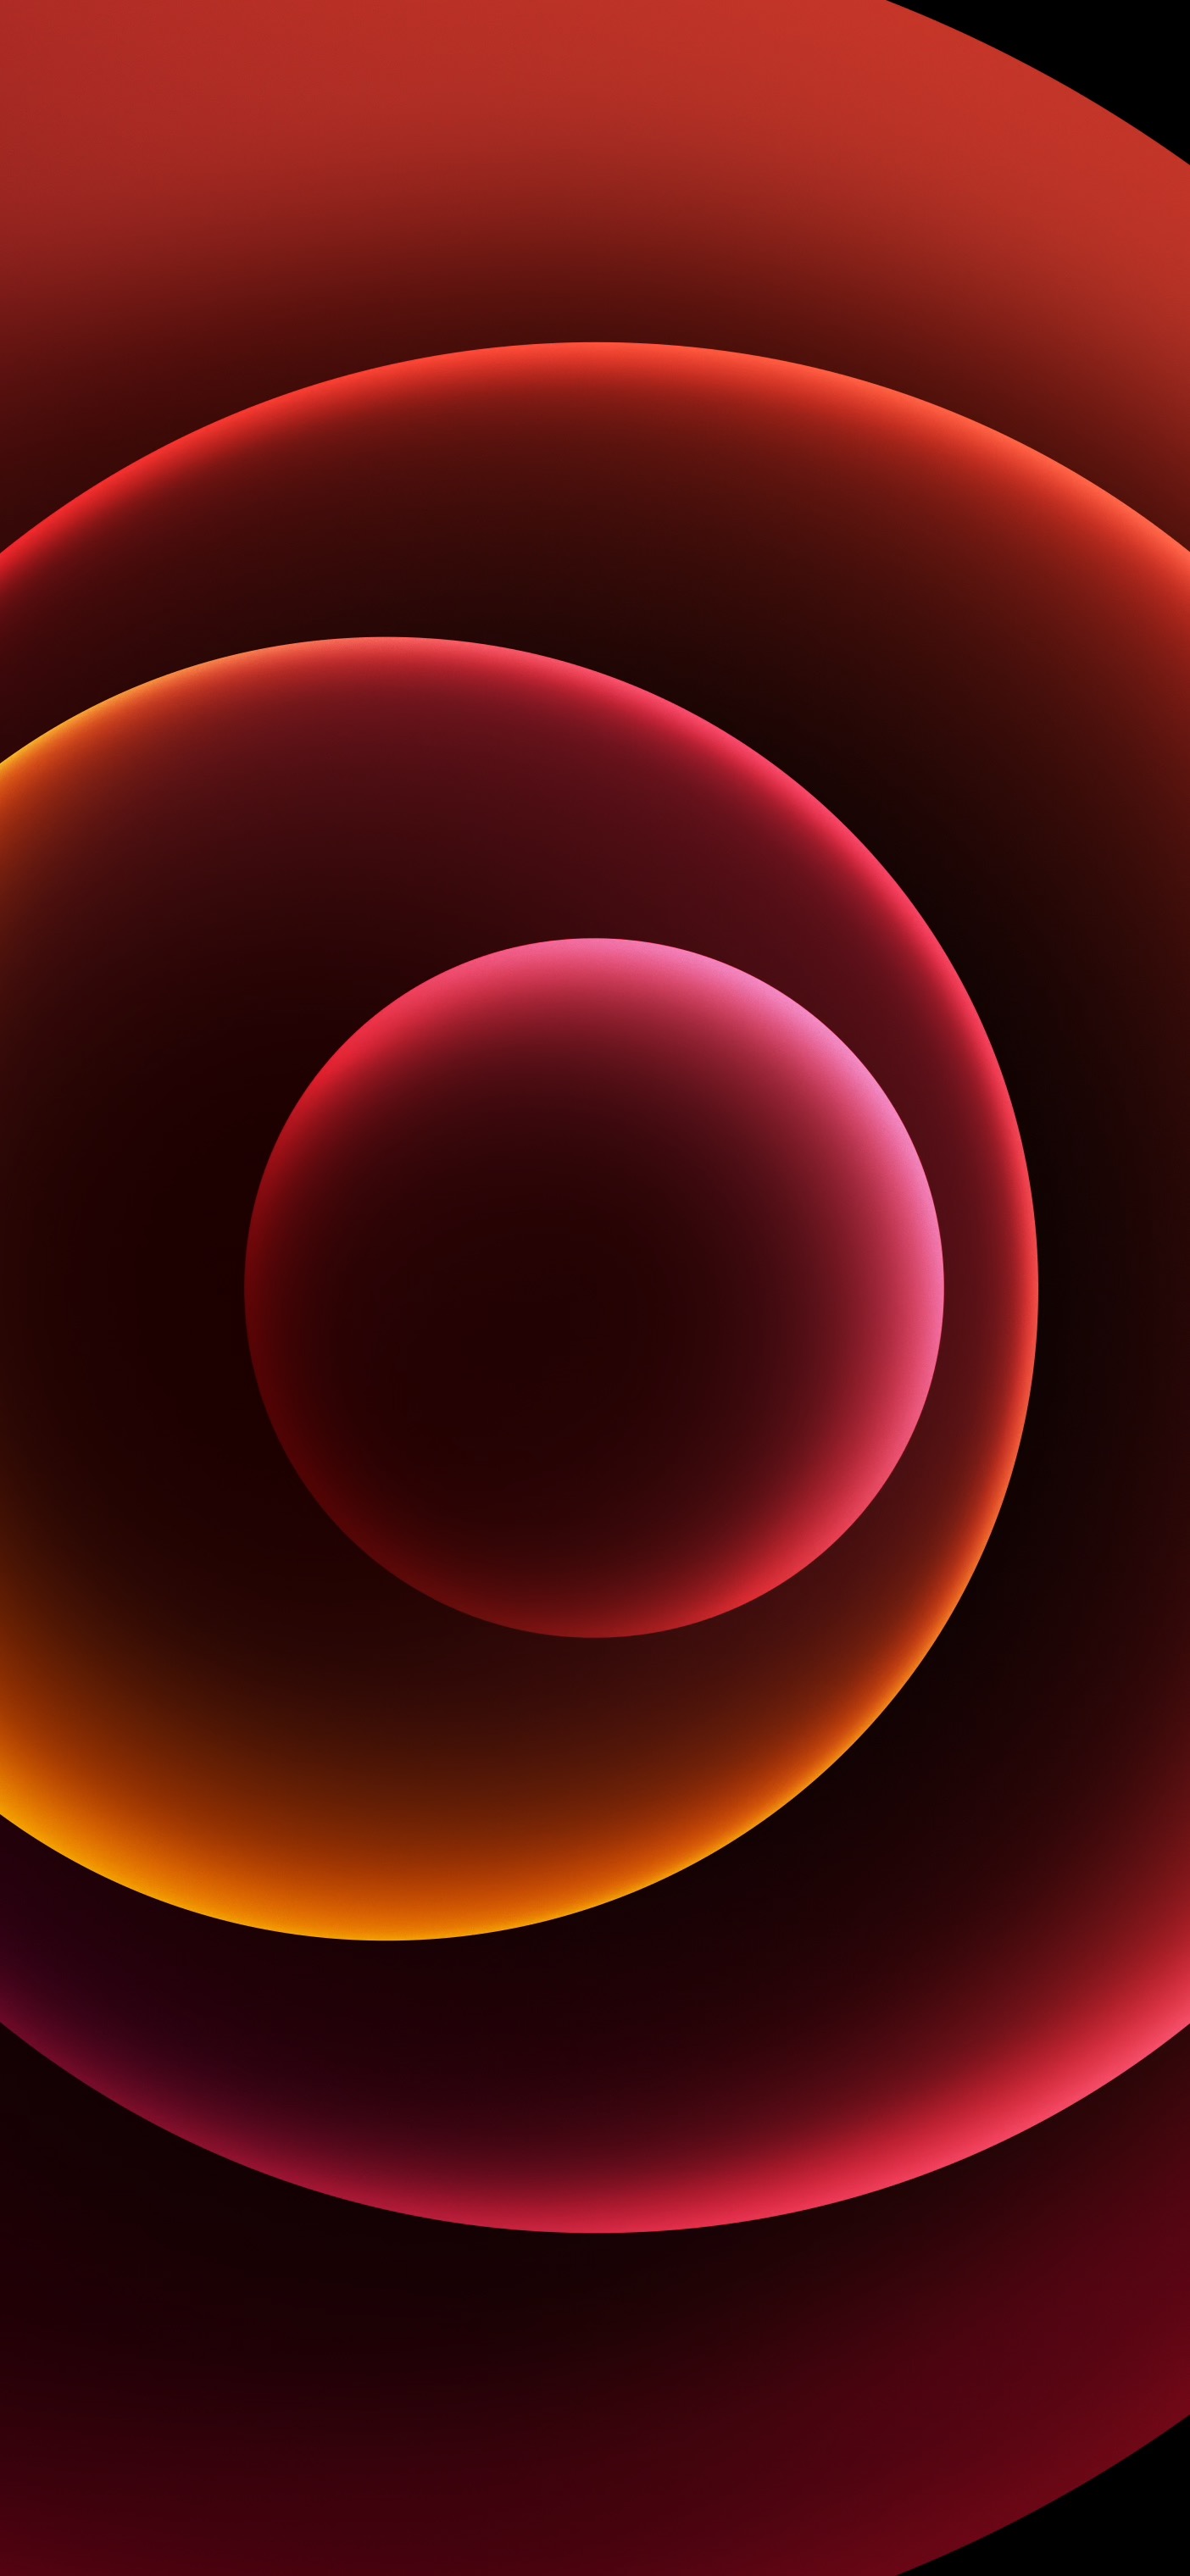 iPhone 12 – Orbs RED (Dark) | LIVE Wallpaper - Wallpapers Central